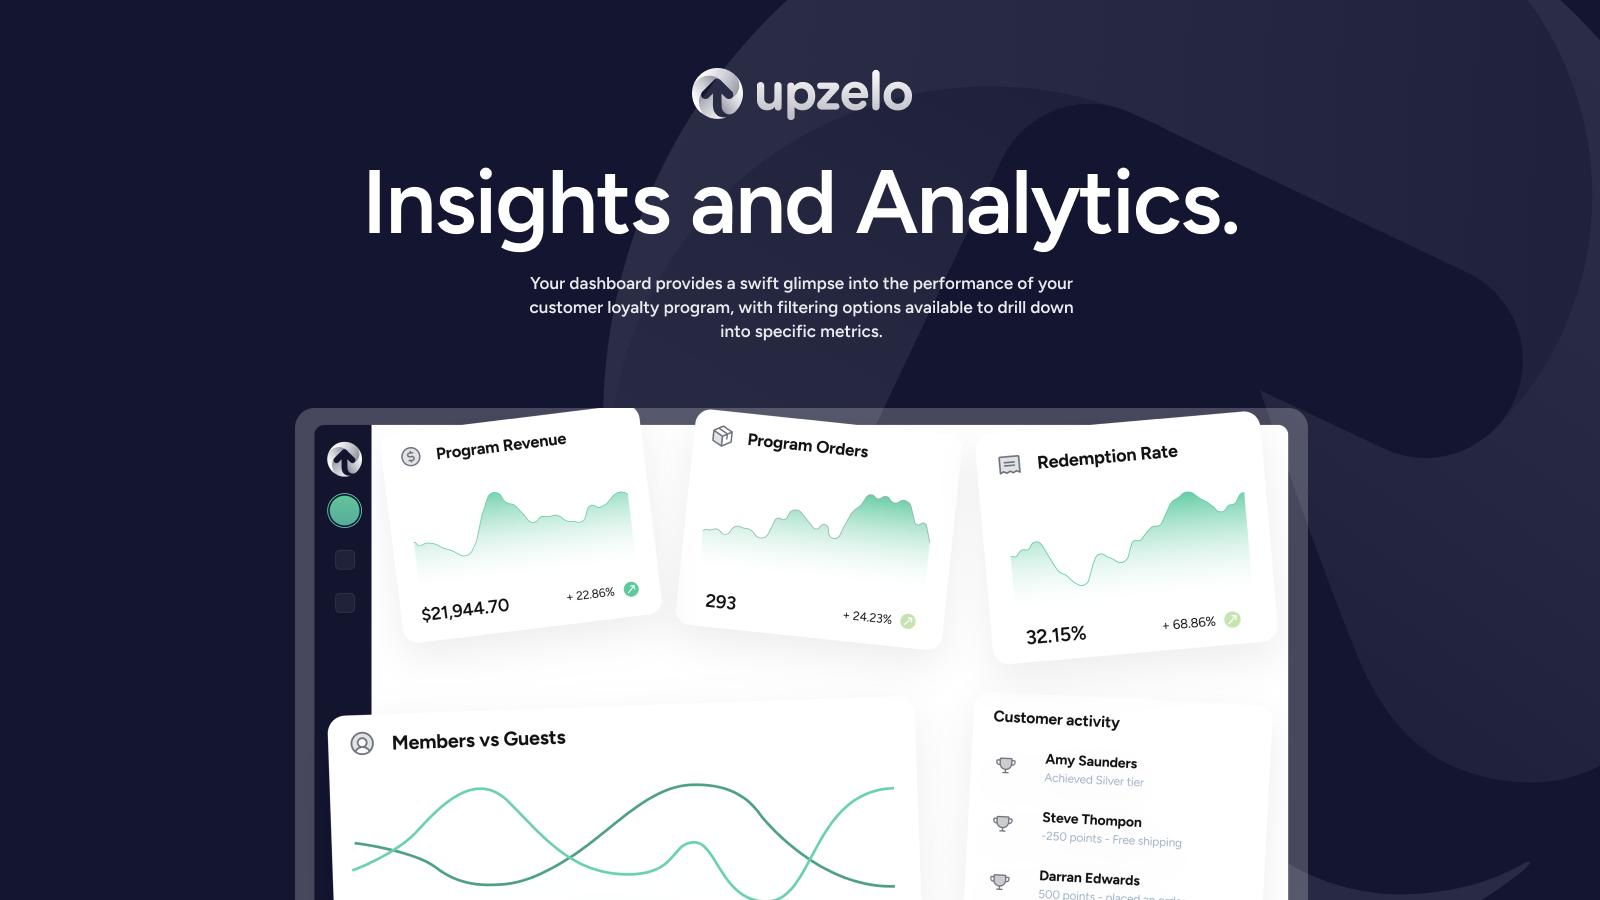 Insights and Analytics. Your dashboard provides a swift glimpse into the performance of your customer loyalty program, with filtering options available to drill down into specific metrics.